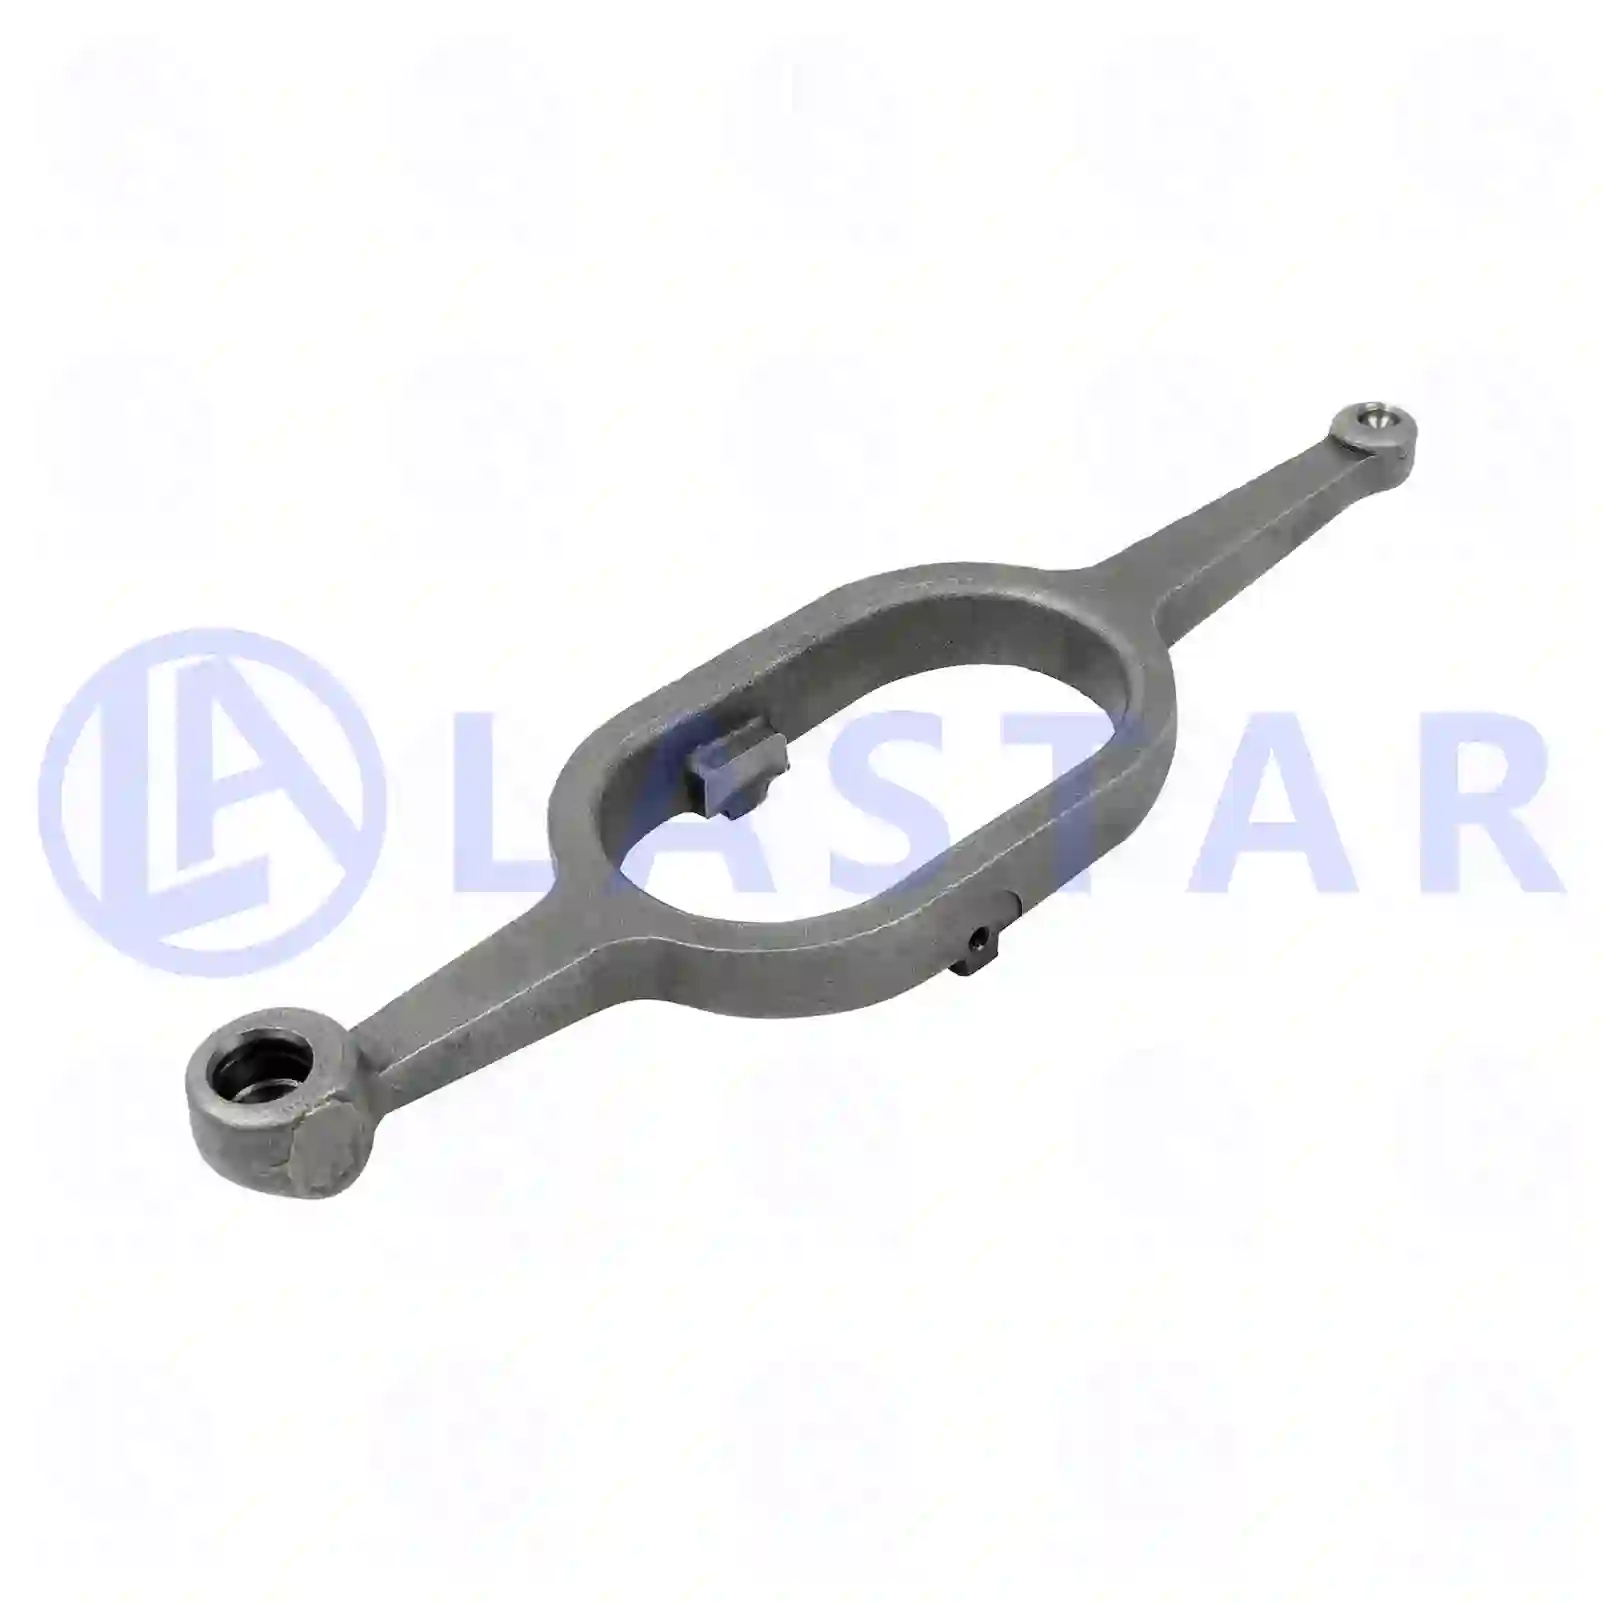 Release lever, 77722688, 0088142, 0276931, 276931, 88142 ||  77722688 Lastar Spare Part | Truck Spare Parts, Auotomotive Spare Parts Release lever, 77722688, 0088142, 0276931, 276931, 88142 ||  77722688 Lastar Spare Part | Truck Spare Parts, Auotomotive Spare Parts